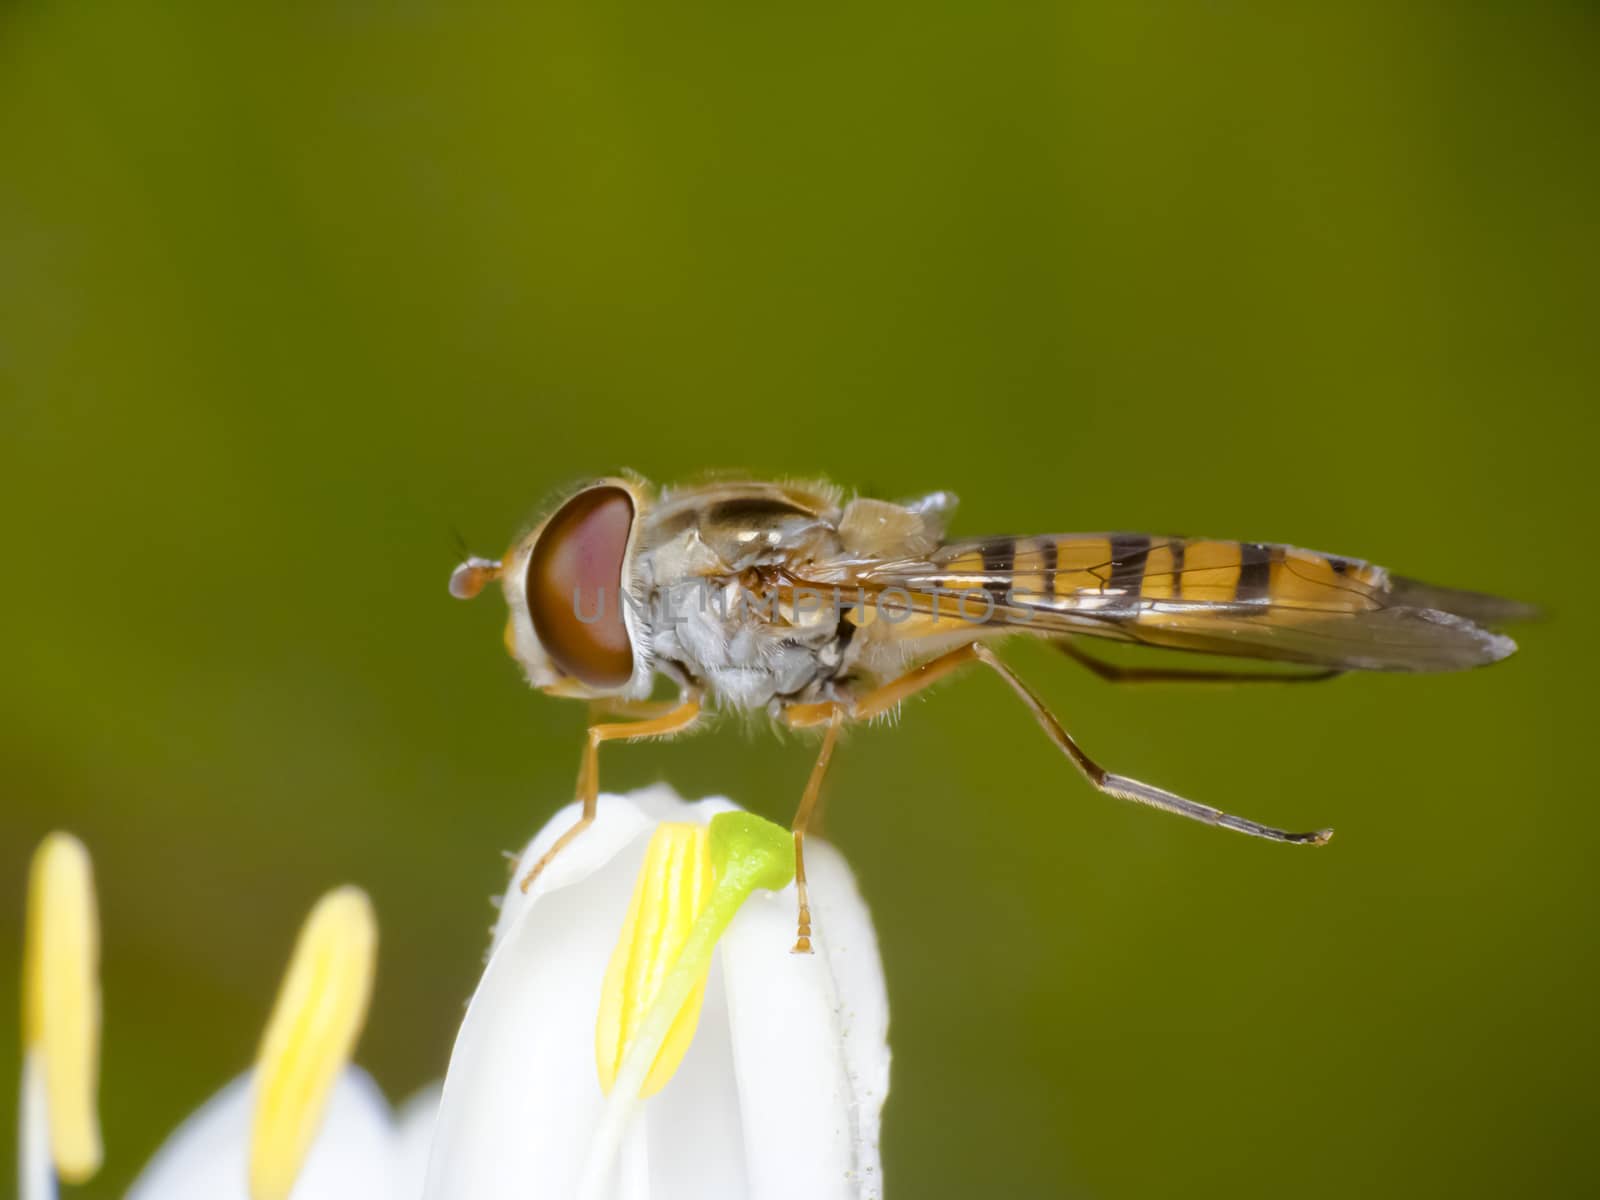 Hover fly by Kidza